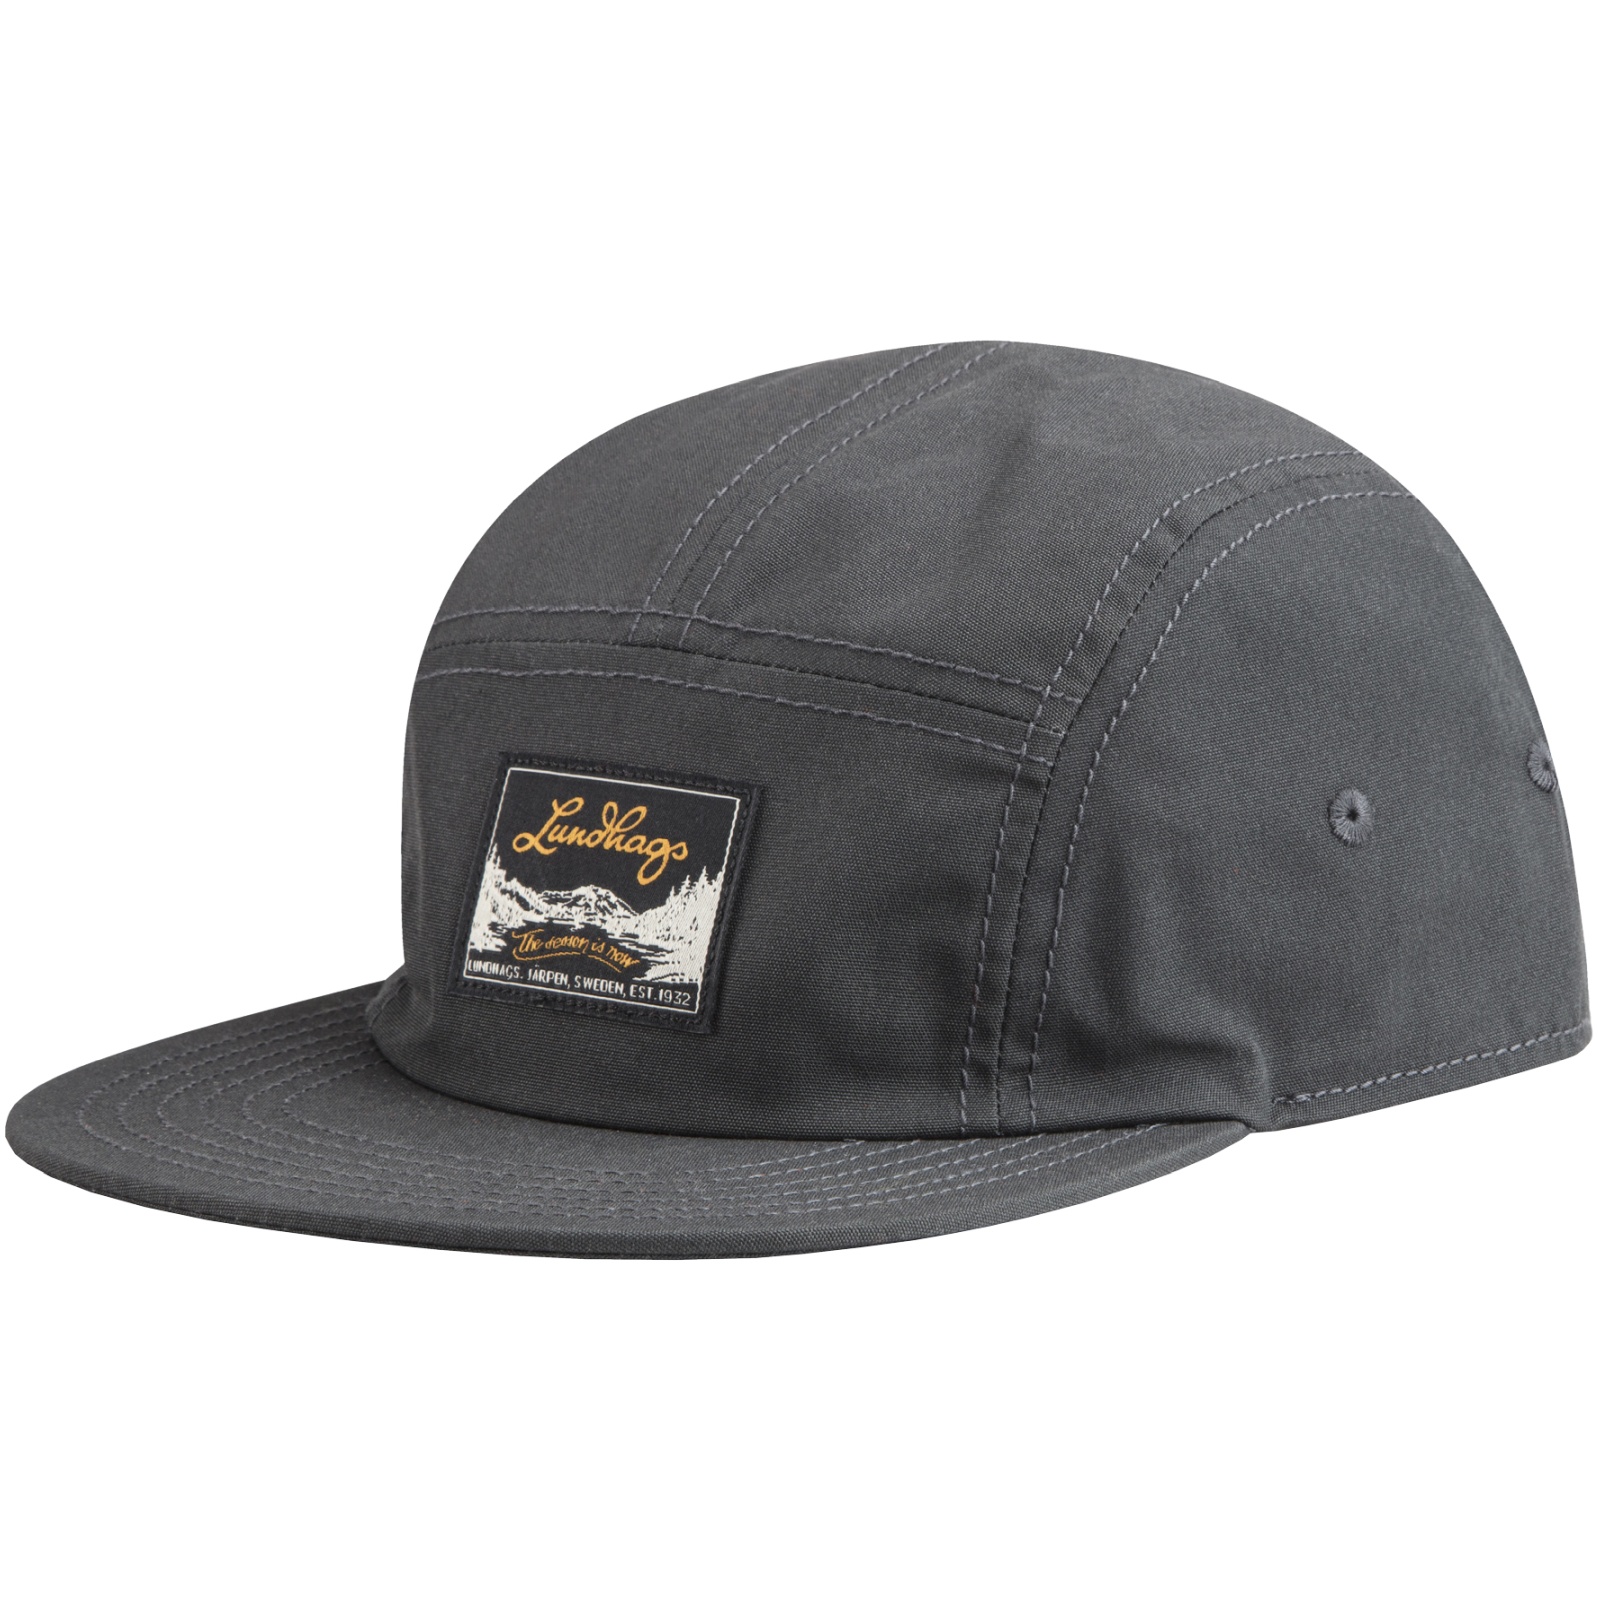 Picture of Lundhags Core Cap - Charcoal 890